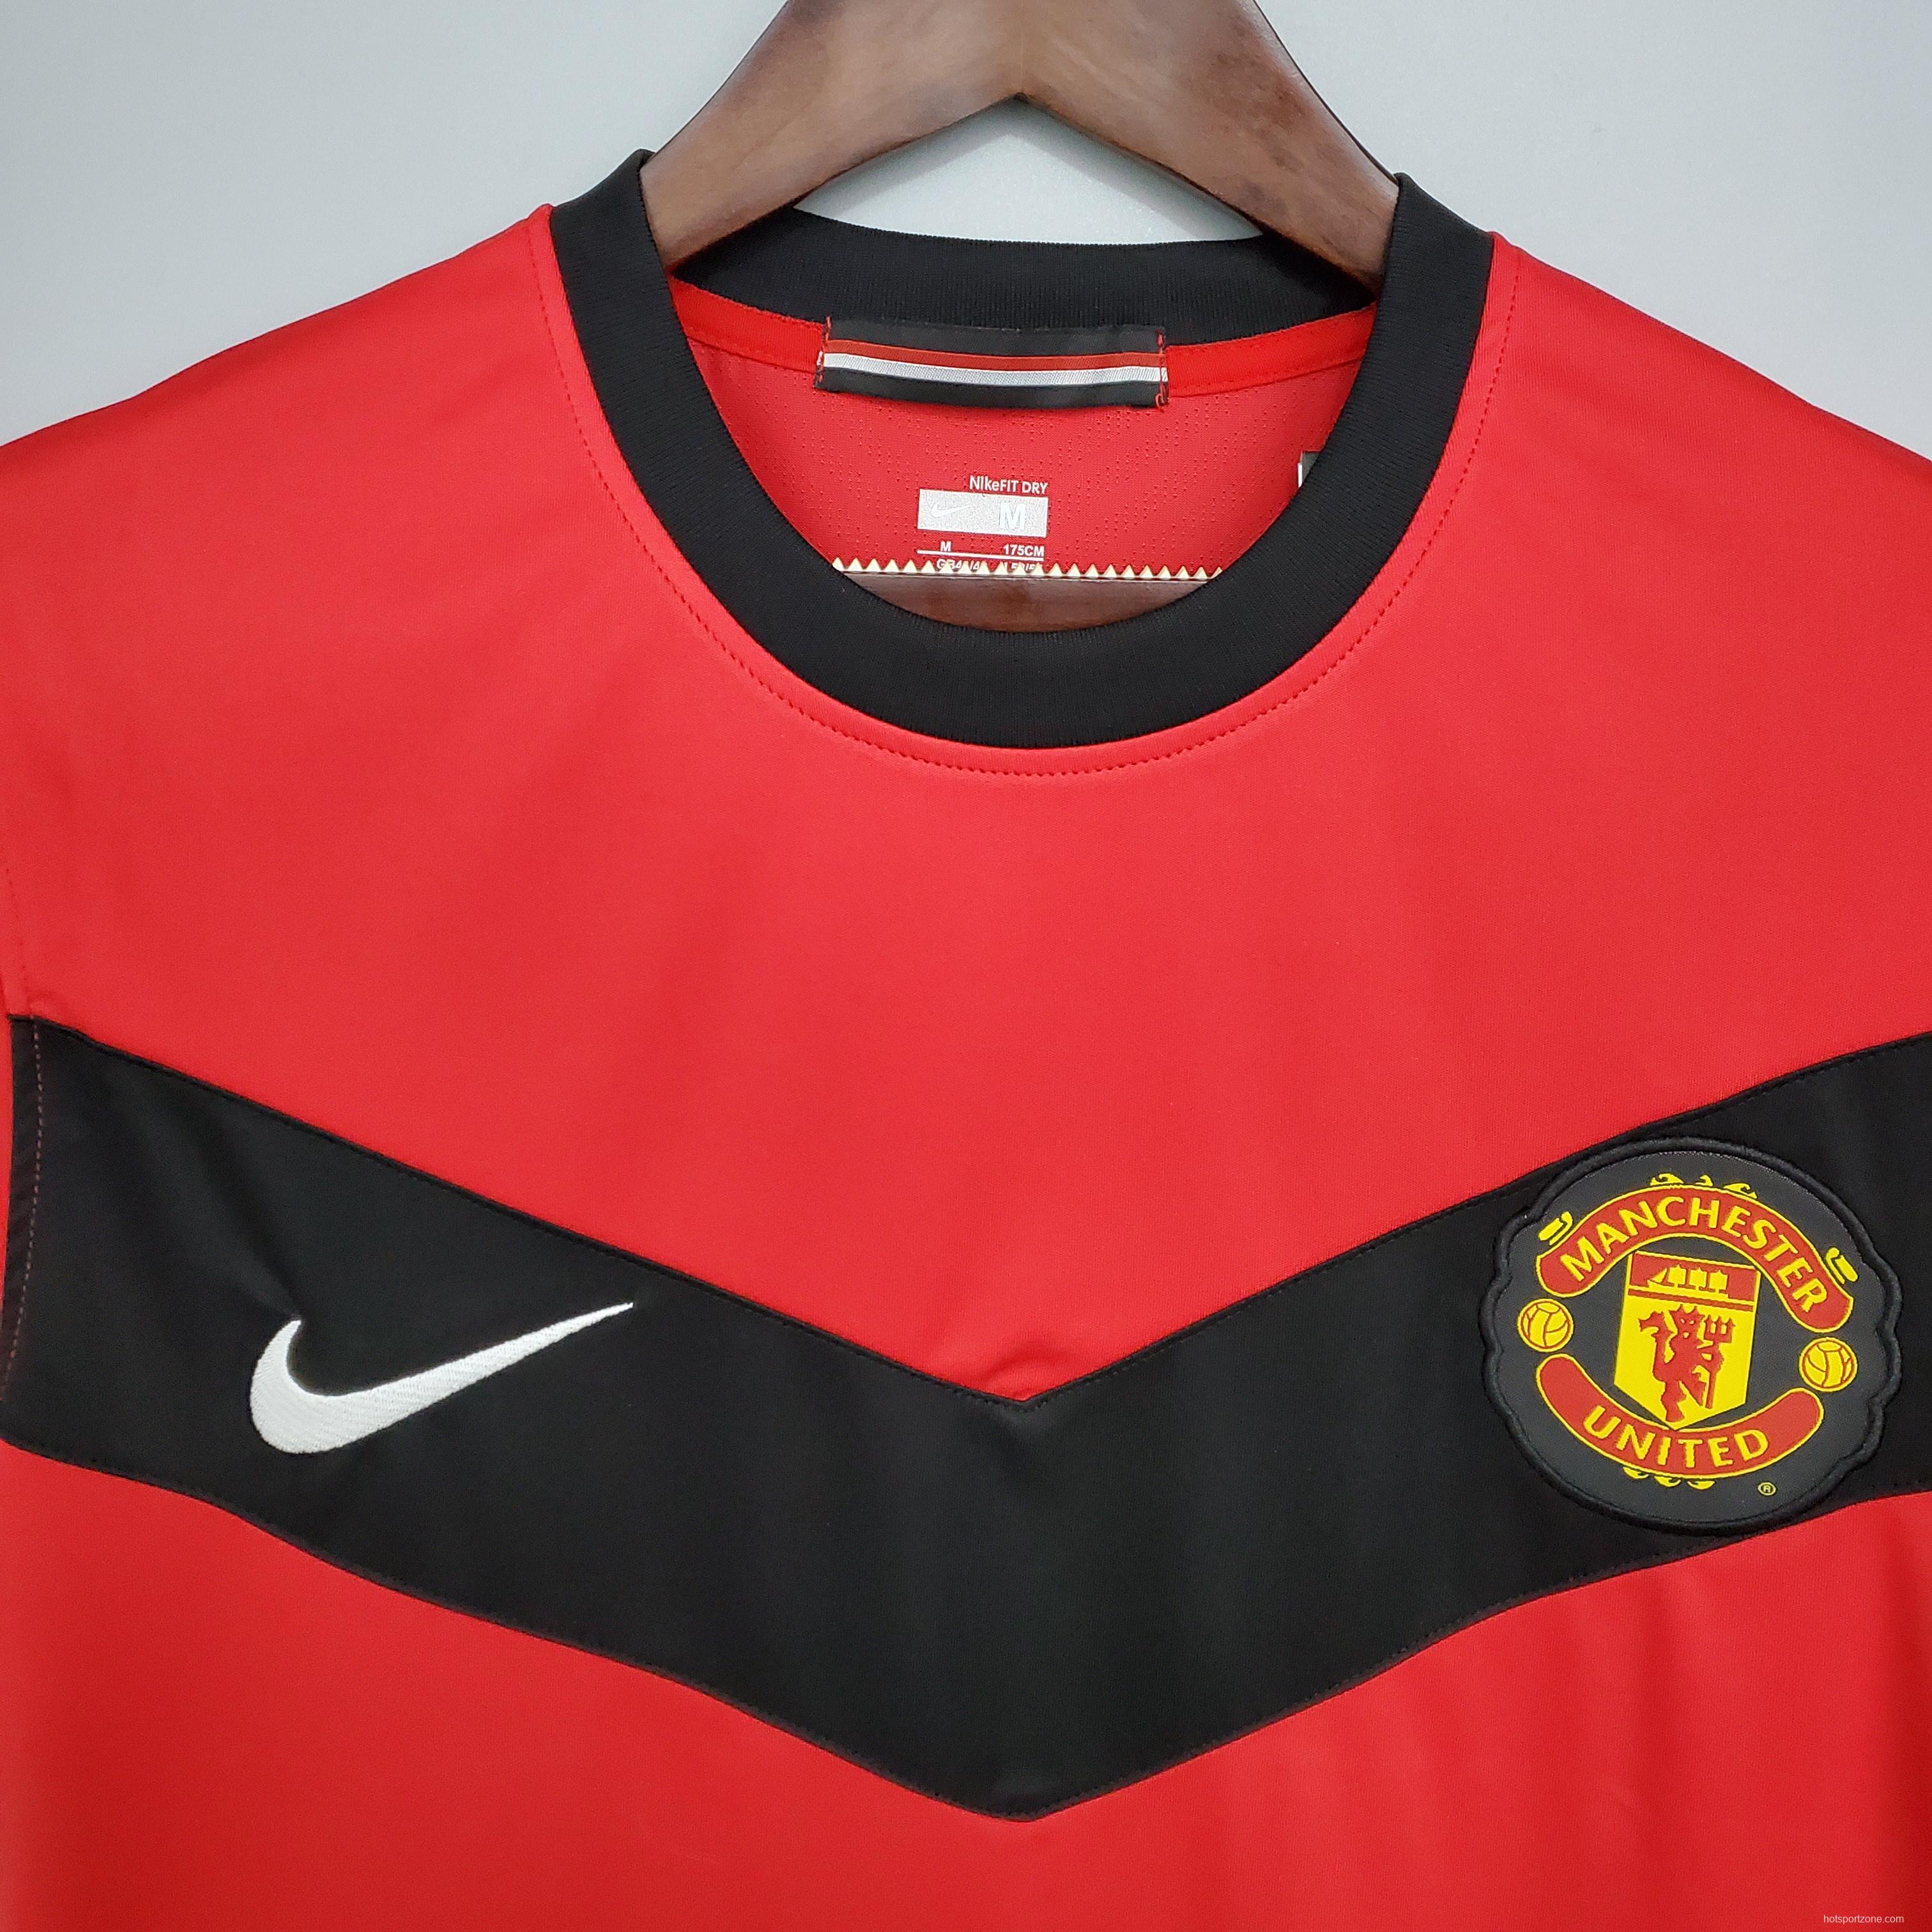 Retro 09/10 Manchester United home Soccer Jersey